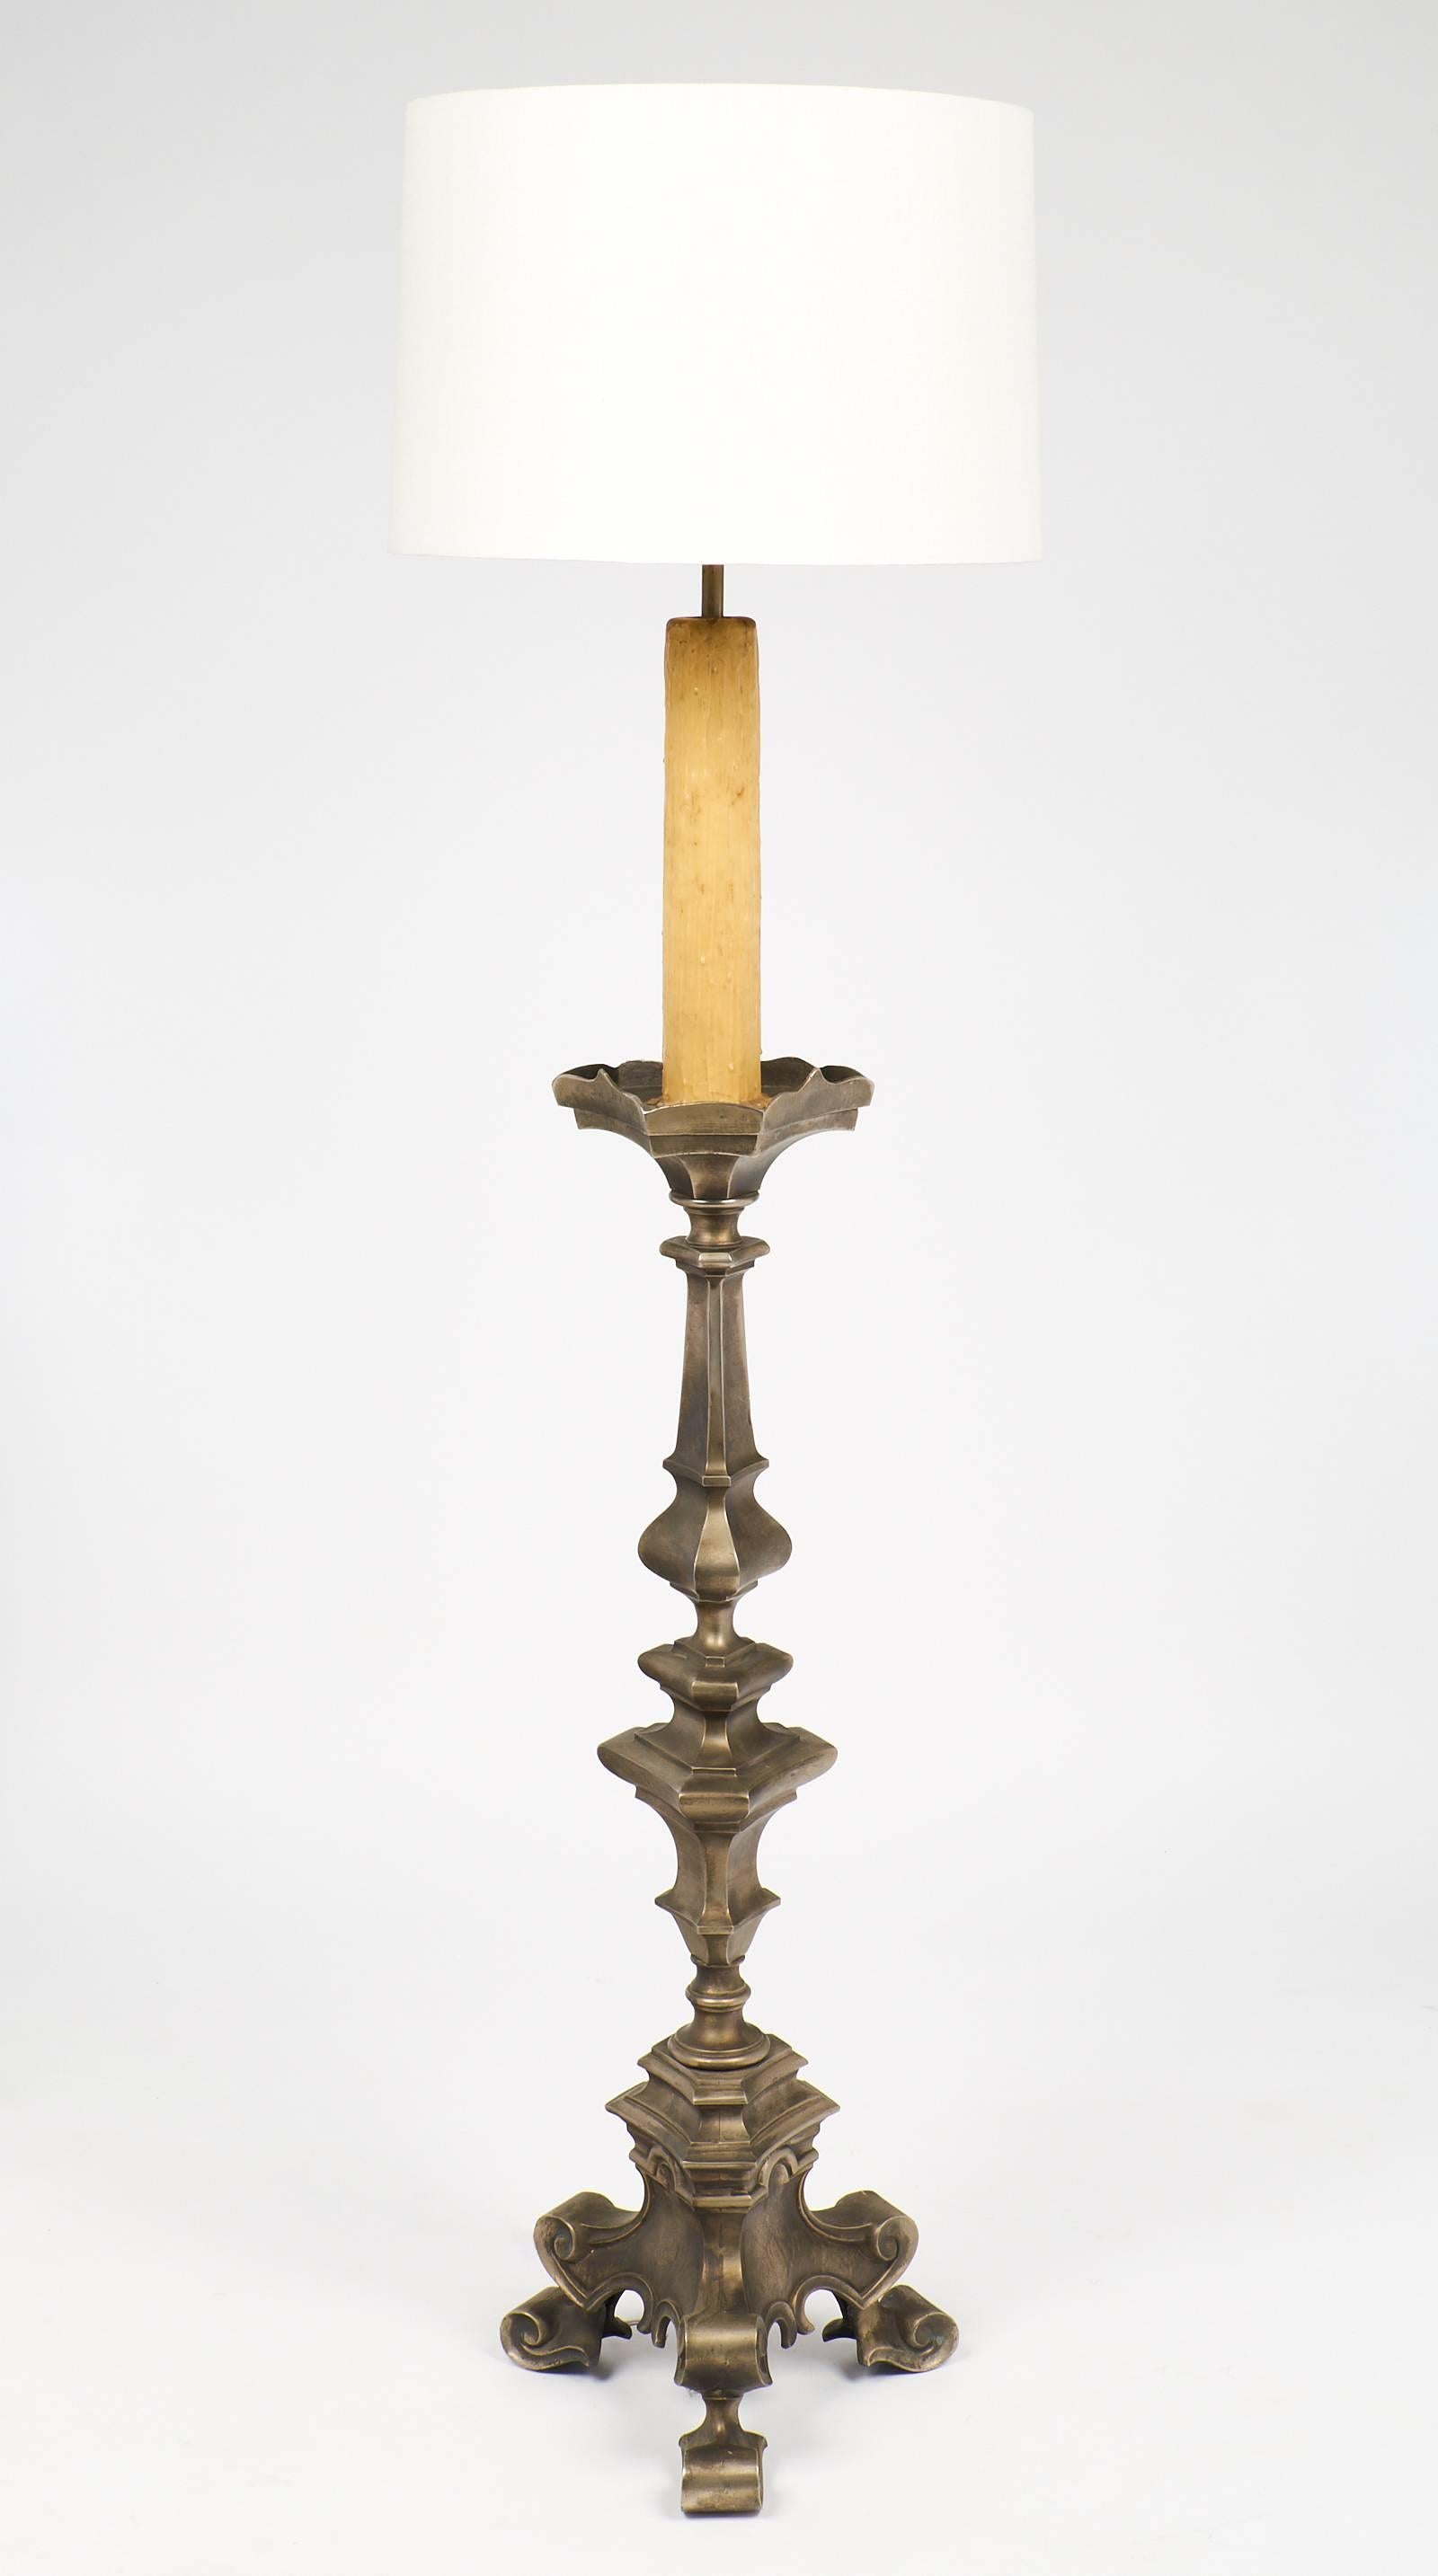 This nickeled, Neo-Renaissance solid brass floor lamp features a faux candlestick and an ornate Neo-Renaissance metal work. This piece has been rewired for the US.